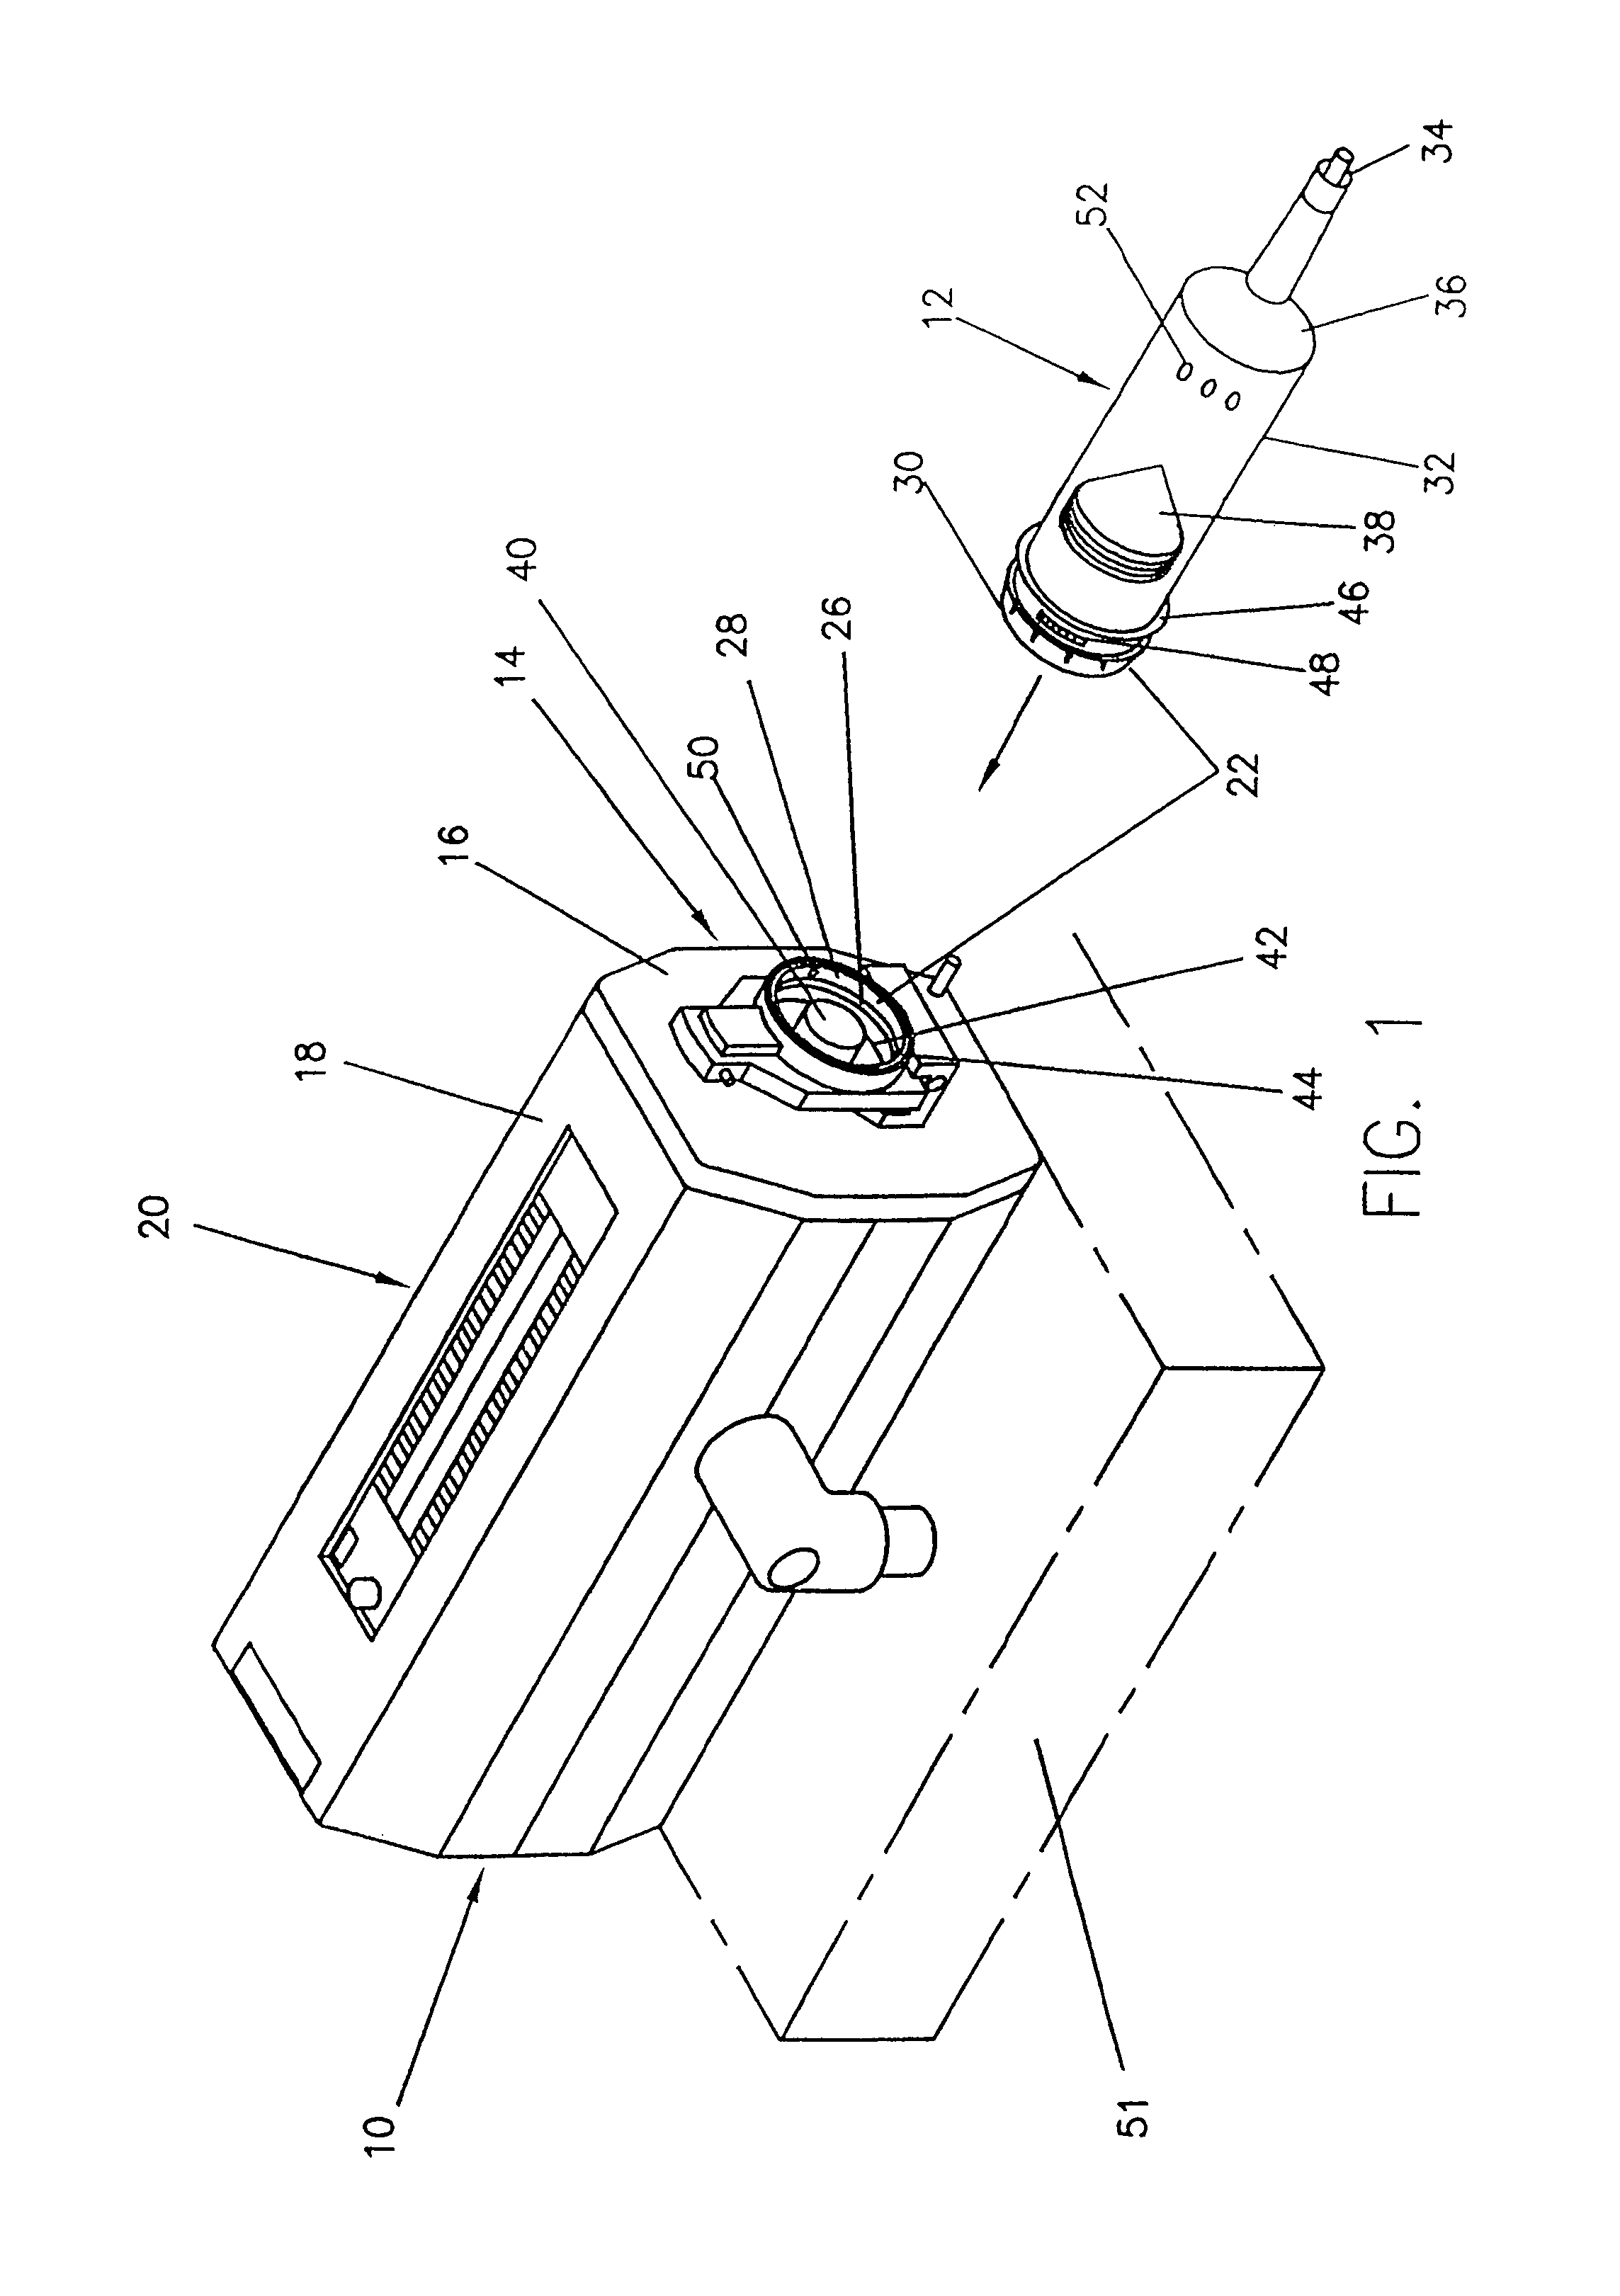 Front-loading syringe adapted to releasably engage a medical injector regardless of the orientation of the syringe with respect to the injector